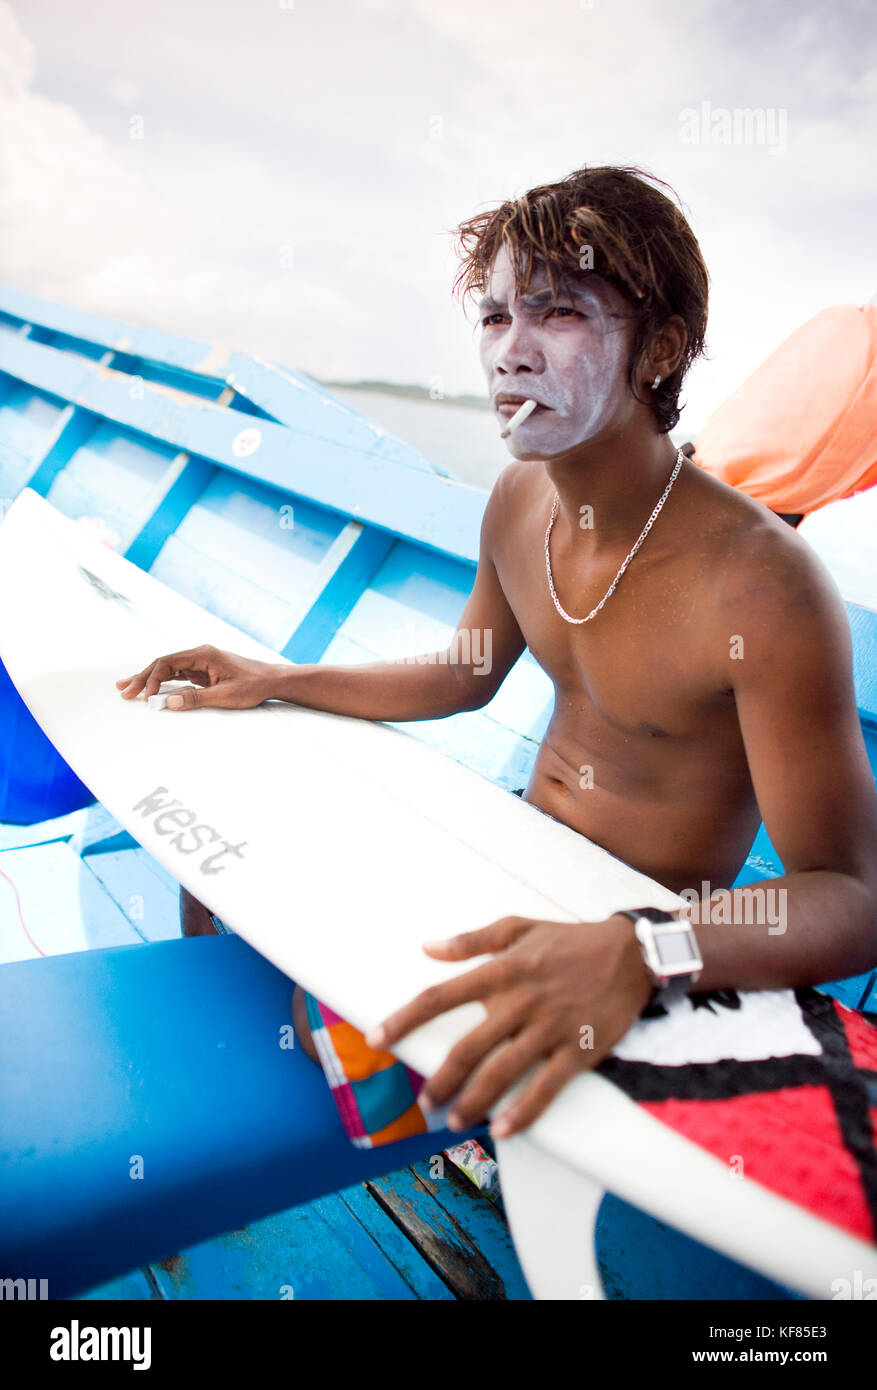 INDONESIA, Mentawai Islands, Kandui Surf Resort, young man with sunscreen  on his face, smoking and holding his surfboard Stock Photo - Alamy